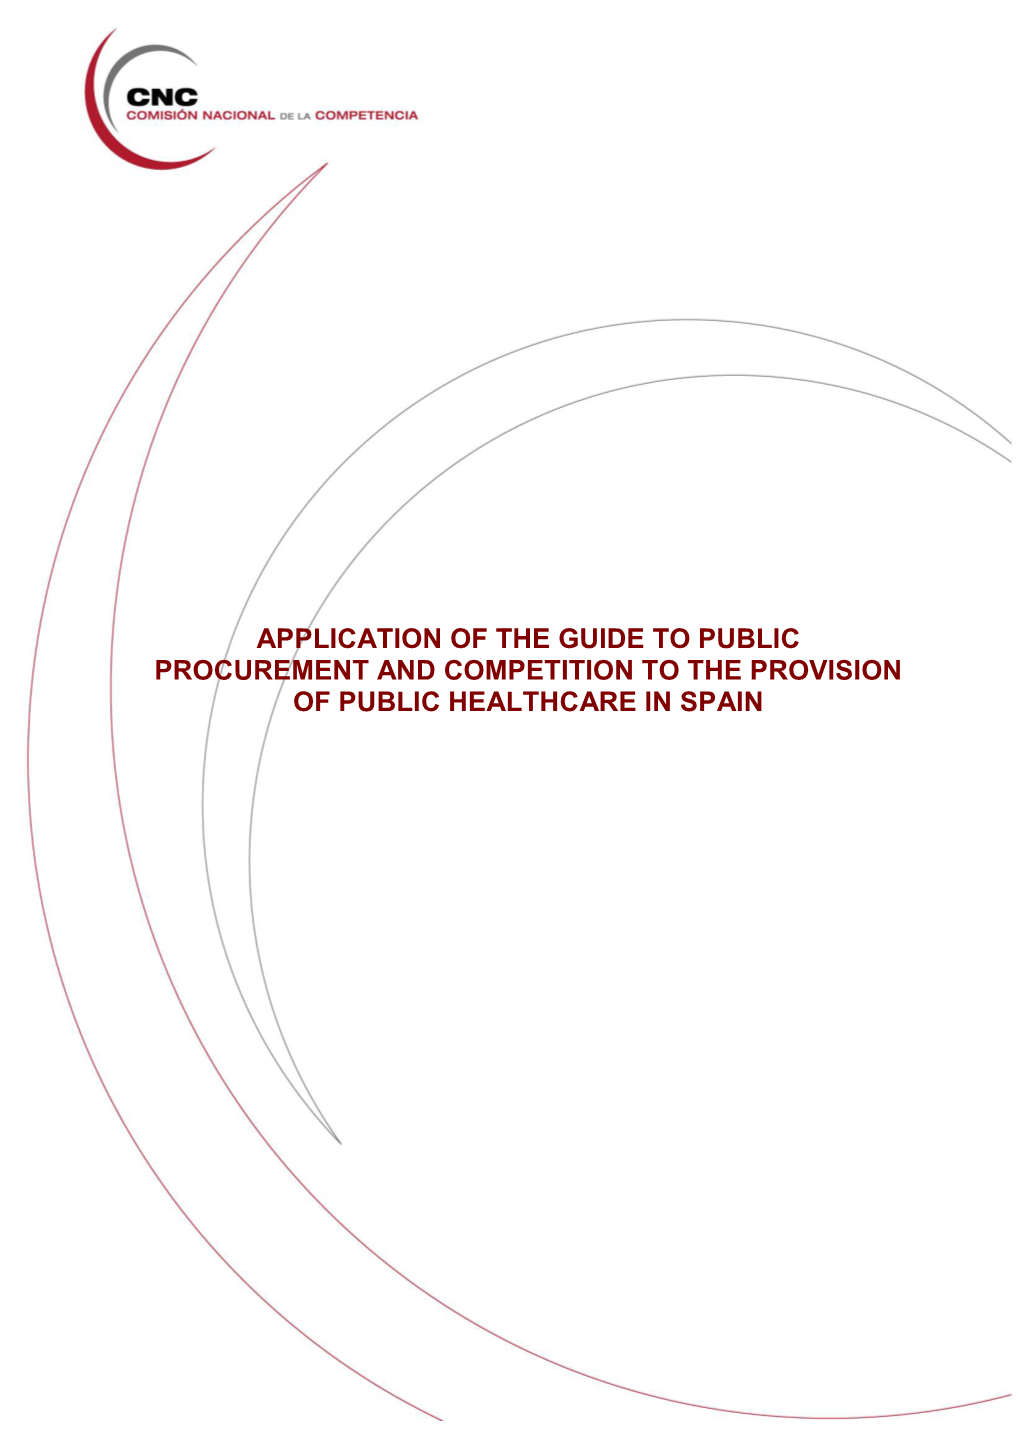 Application of the Guide to Public Procurement and Competition to the Provision of Public Healthcare in Spain